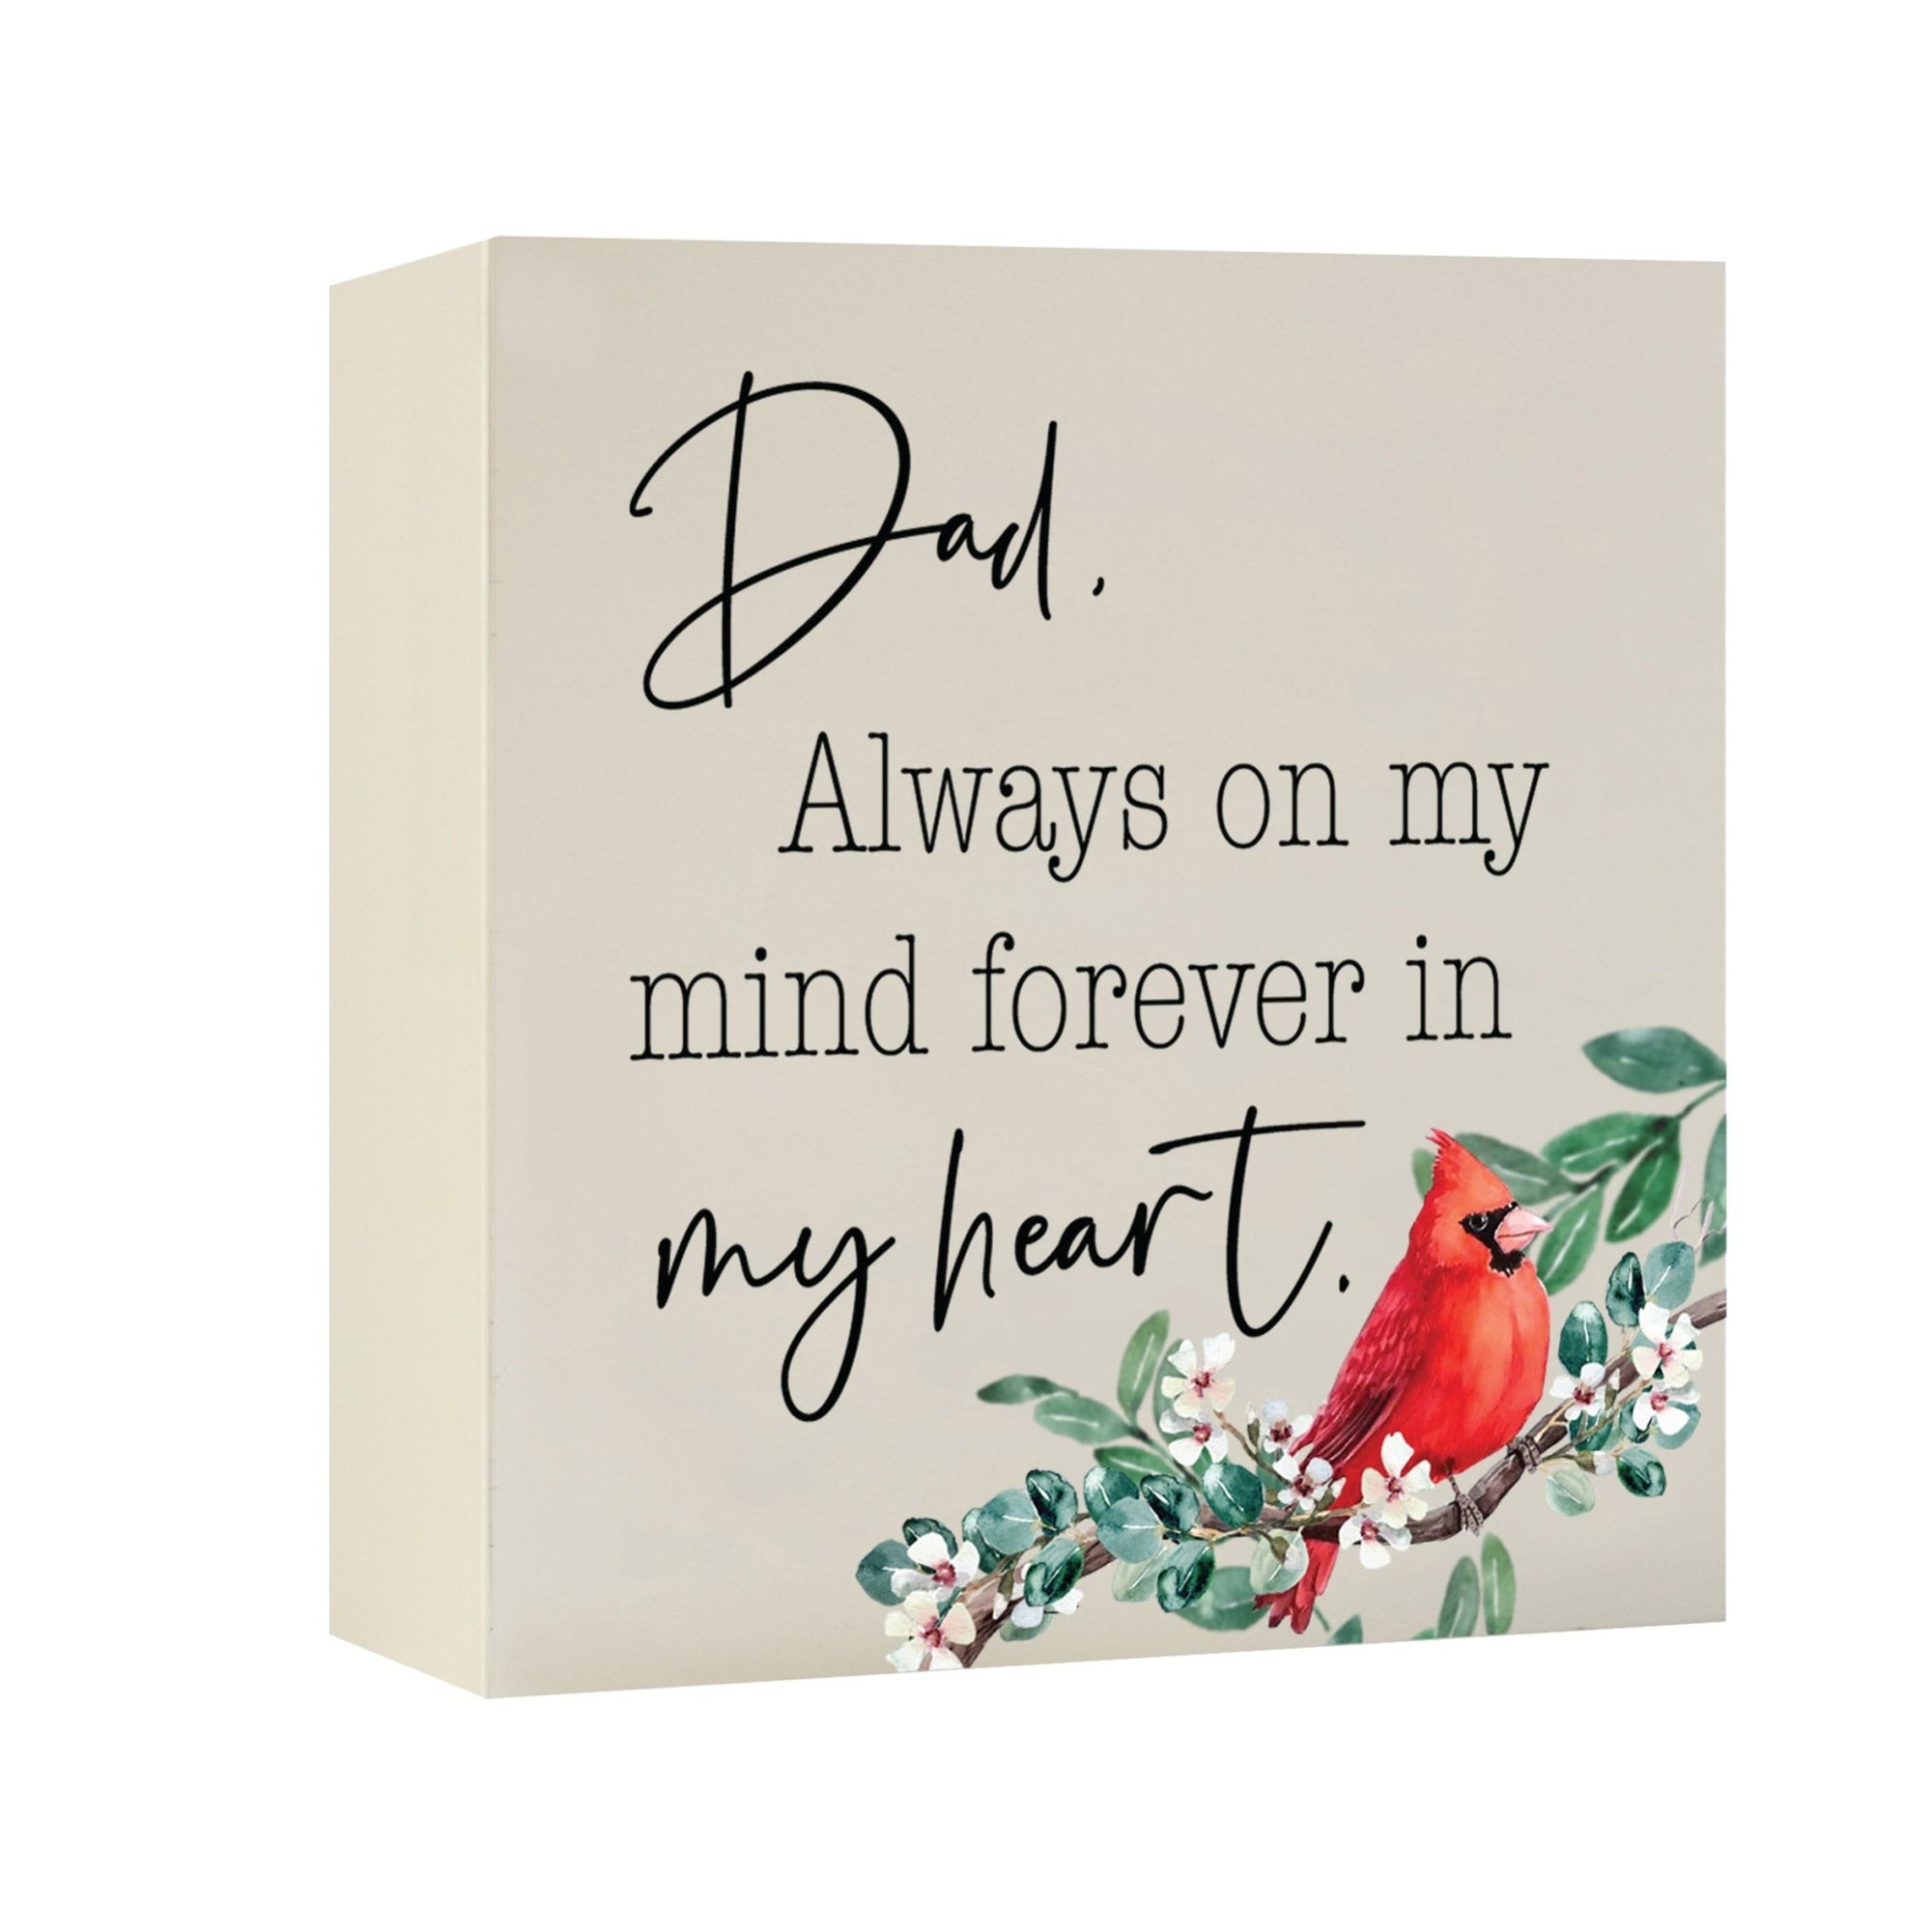 An elegant wooden urn for human ashes, a dignified tribute for your loved one. Dad Urn